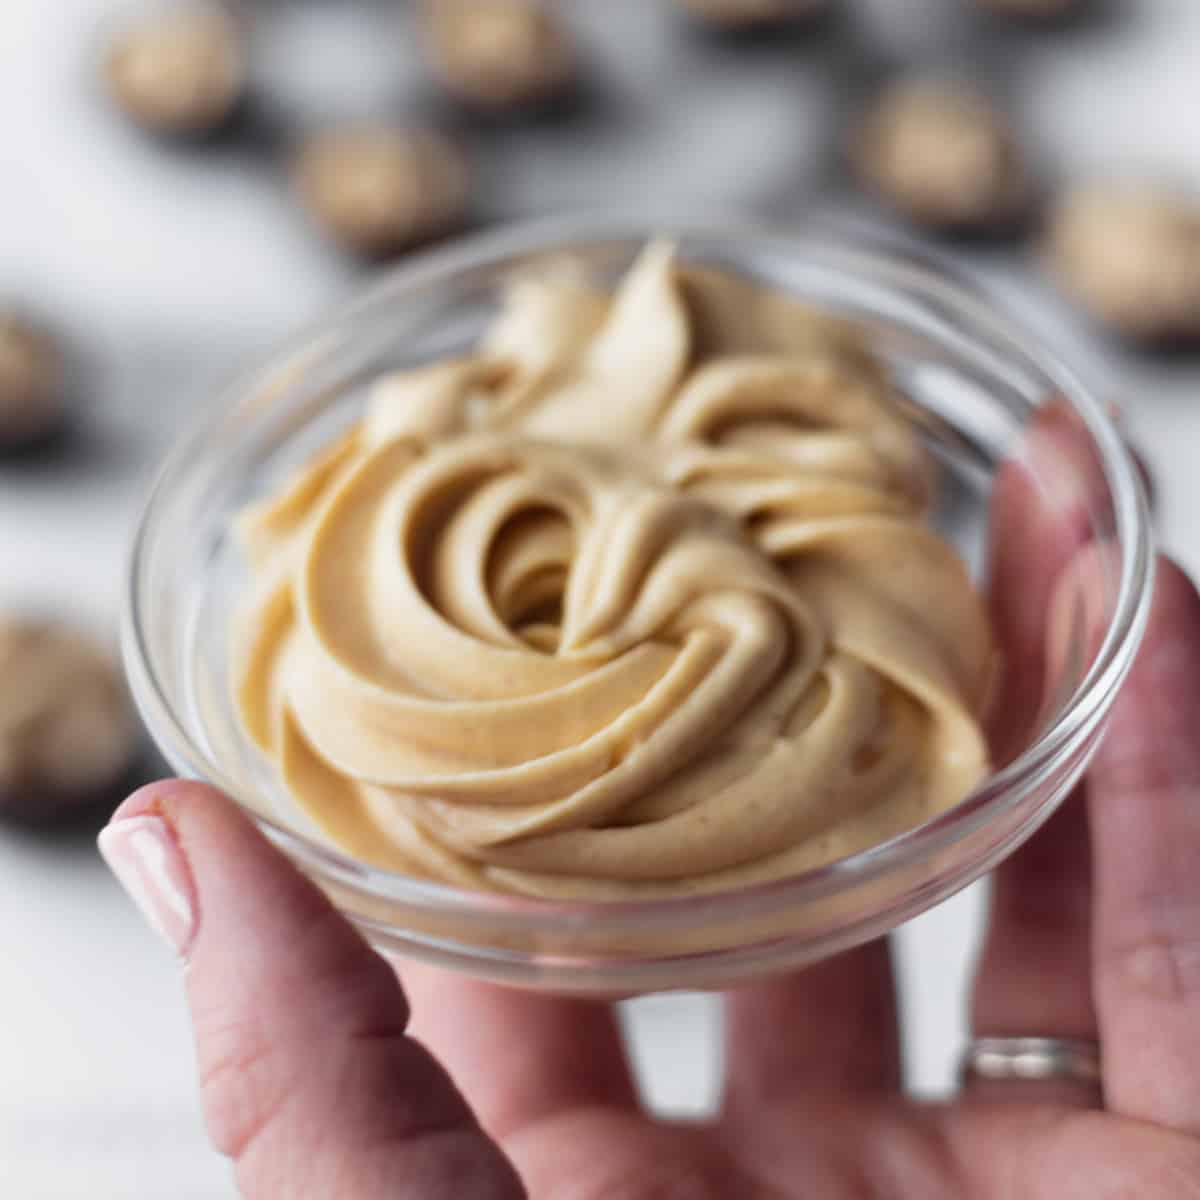 peanut butter mousse finished